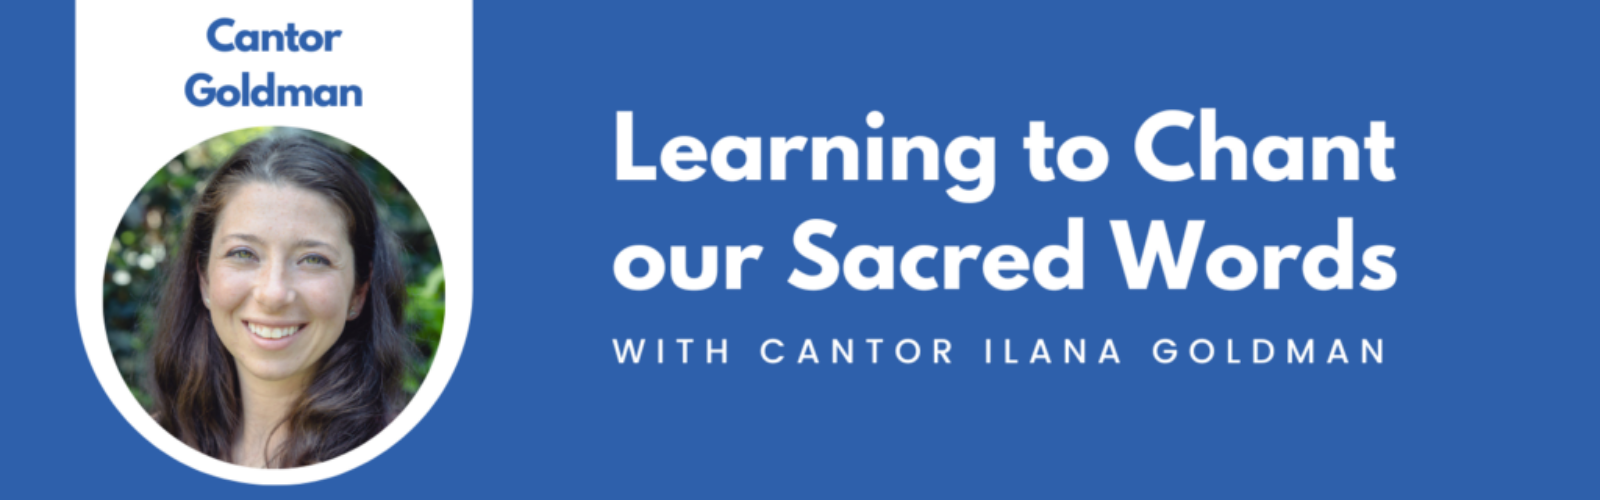 Learning to chant our sacred words